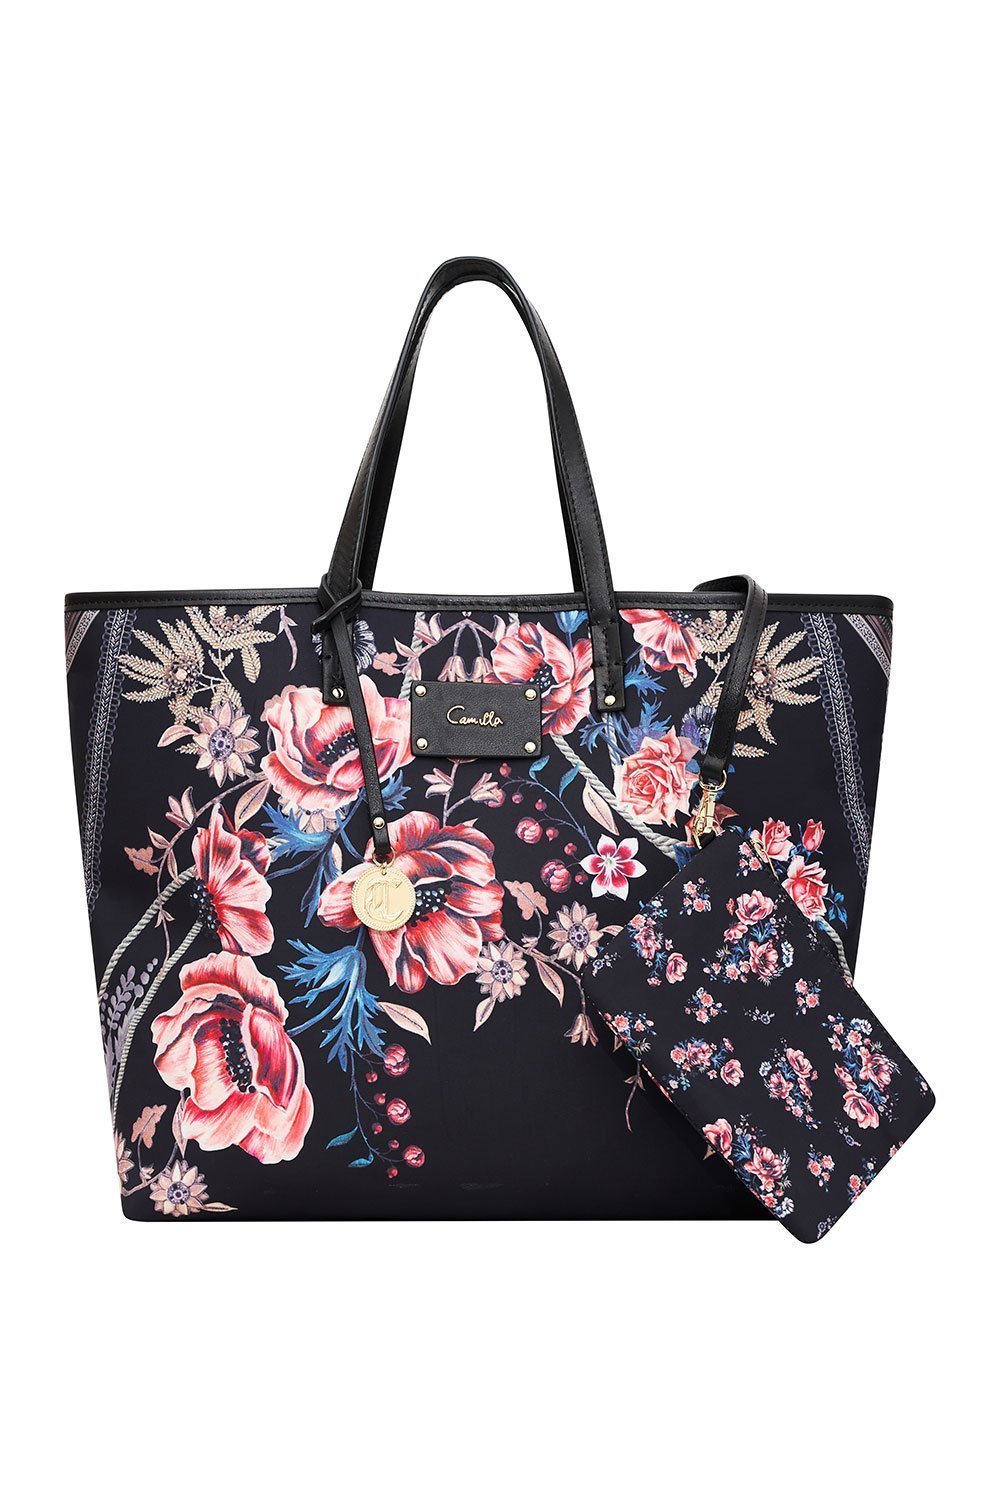 EAST WEST TOTE BELLE OF THE BAROQUE